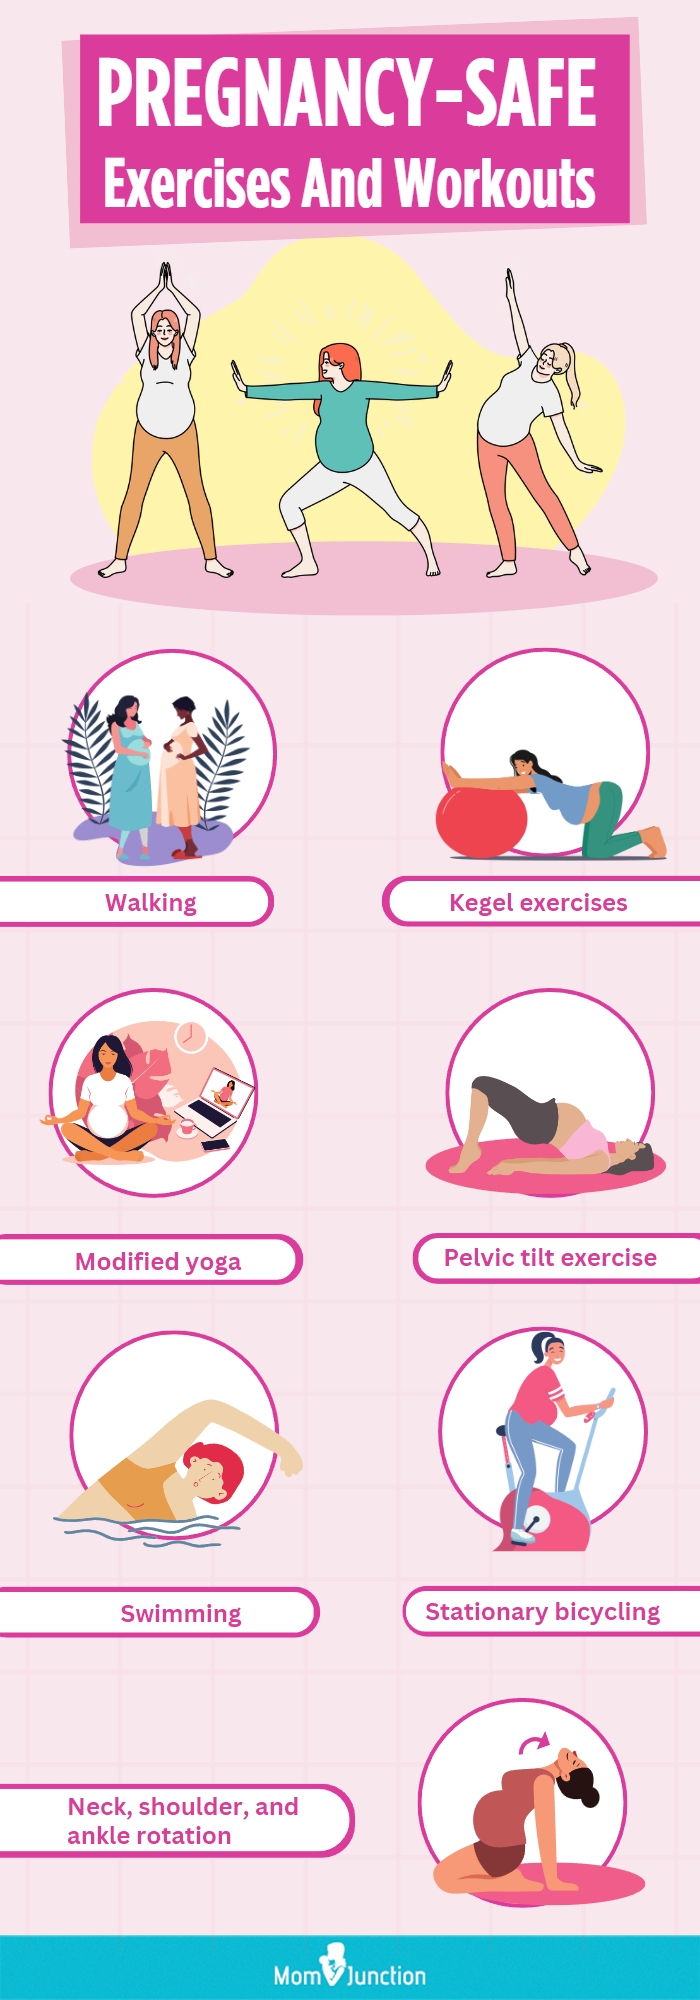 Everything You Need to Know About Kegel Exercises When Pregnant